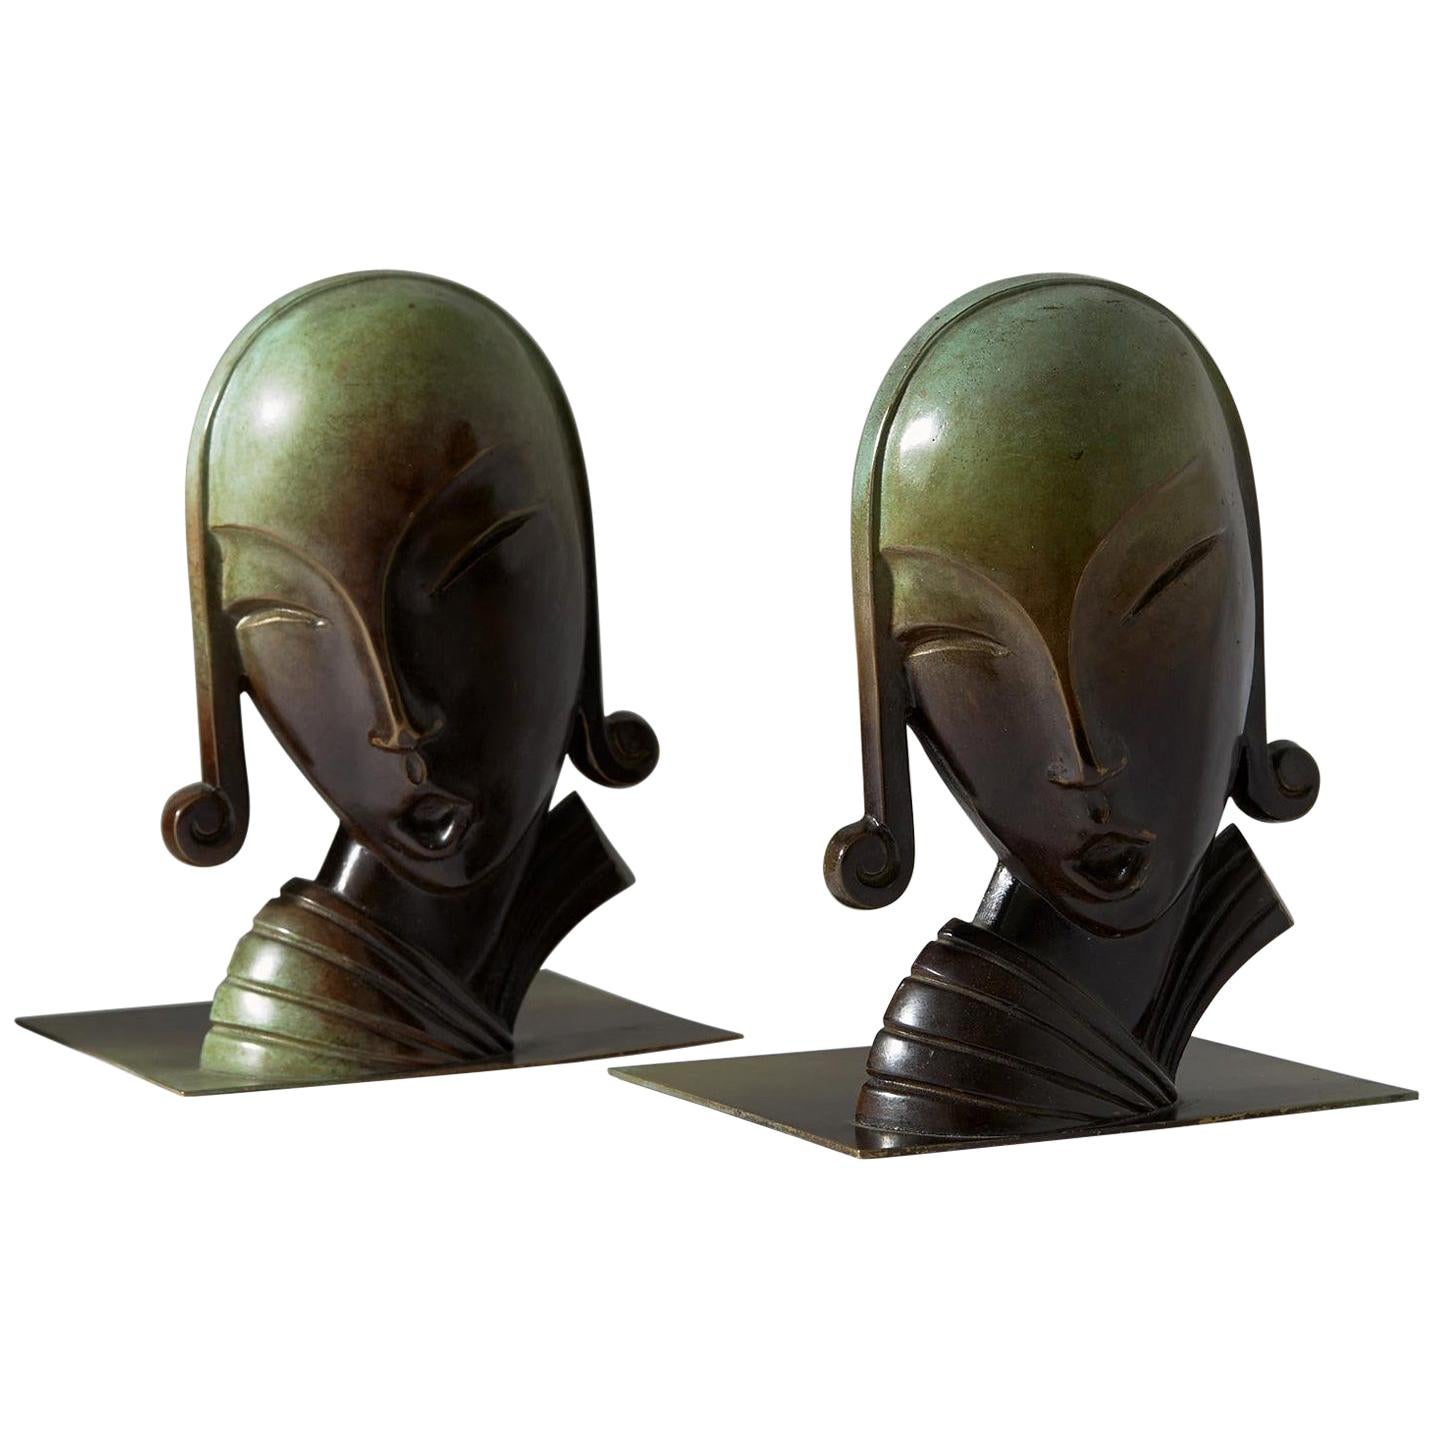 Book Ends, Designed by CE Borgström for Ystad Metall AB, Sweden, 1930s